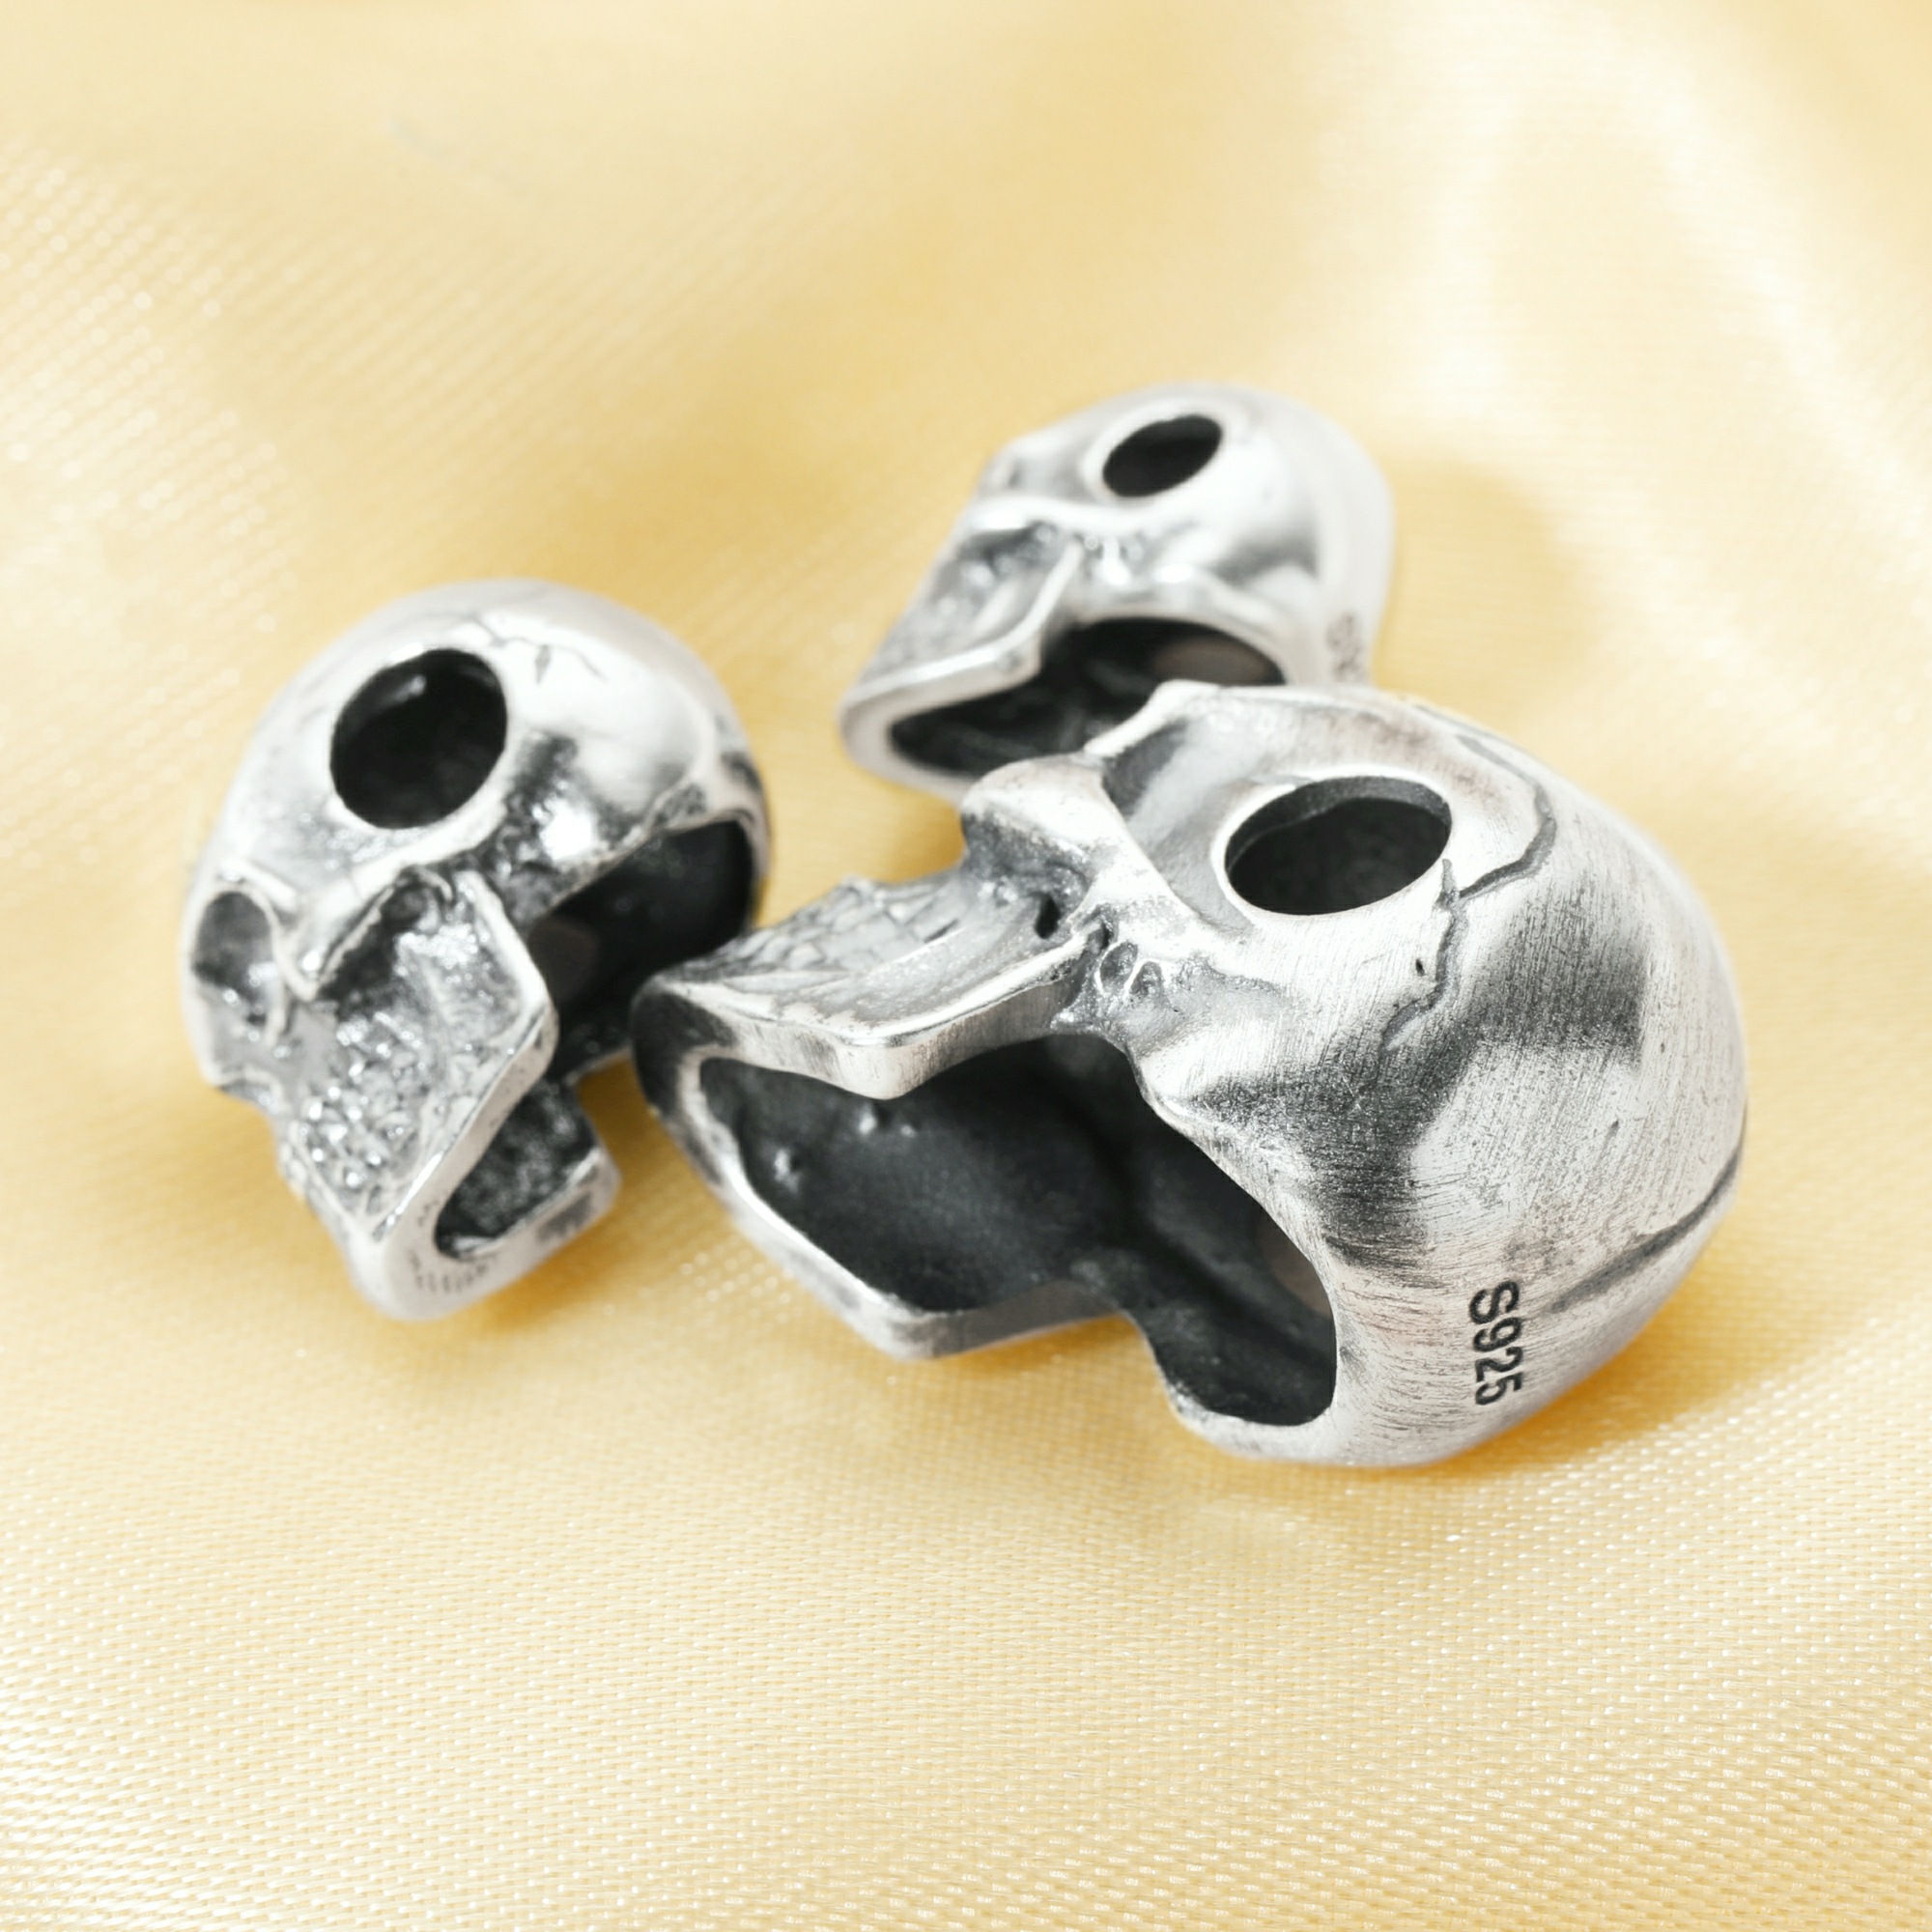 Antiqued Silver Skull Bead,Vintage Solid 925 Sterling Silver Skull Pendant Charm,DIY Beading Supplies 1800575 - Click Image to Close